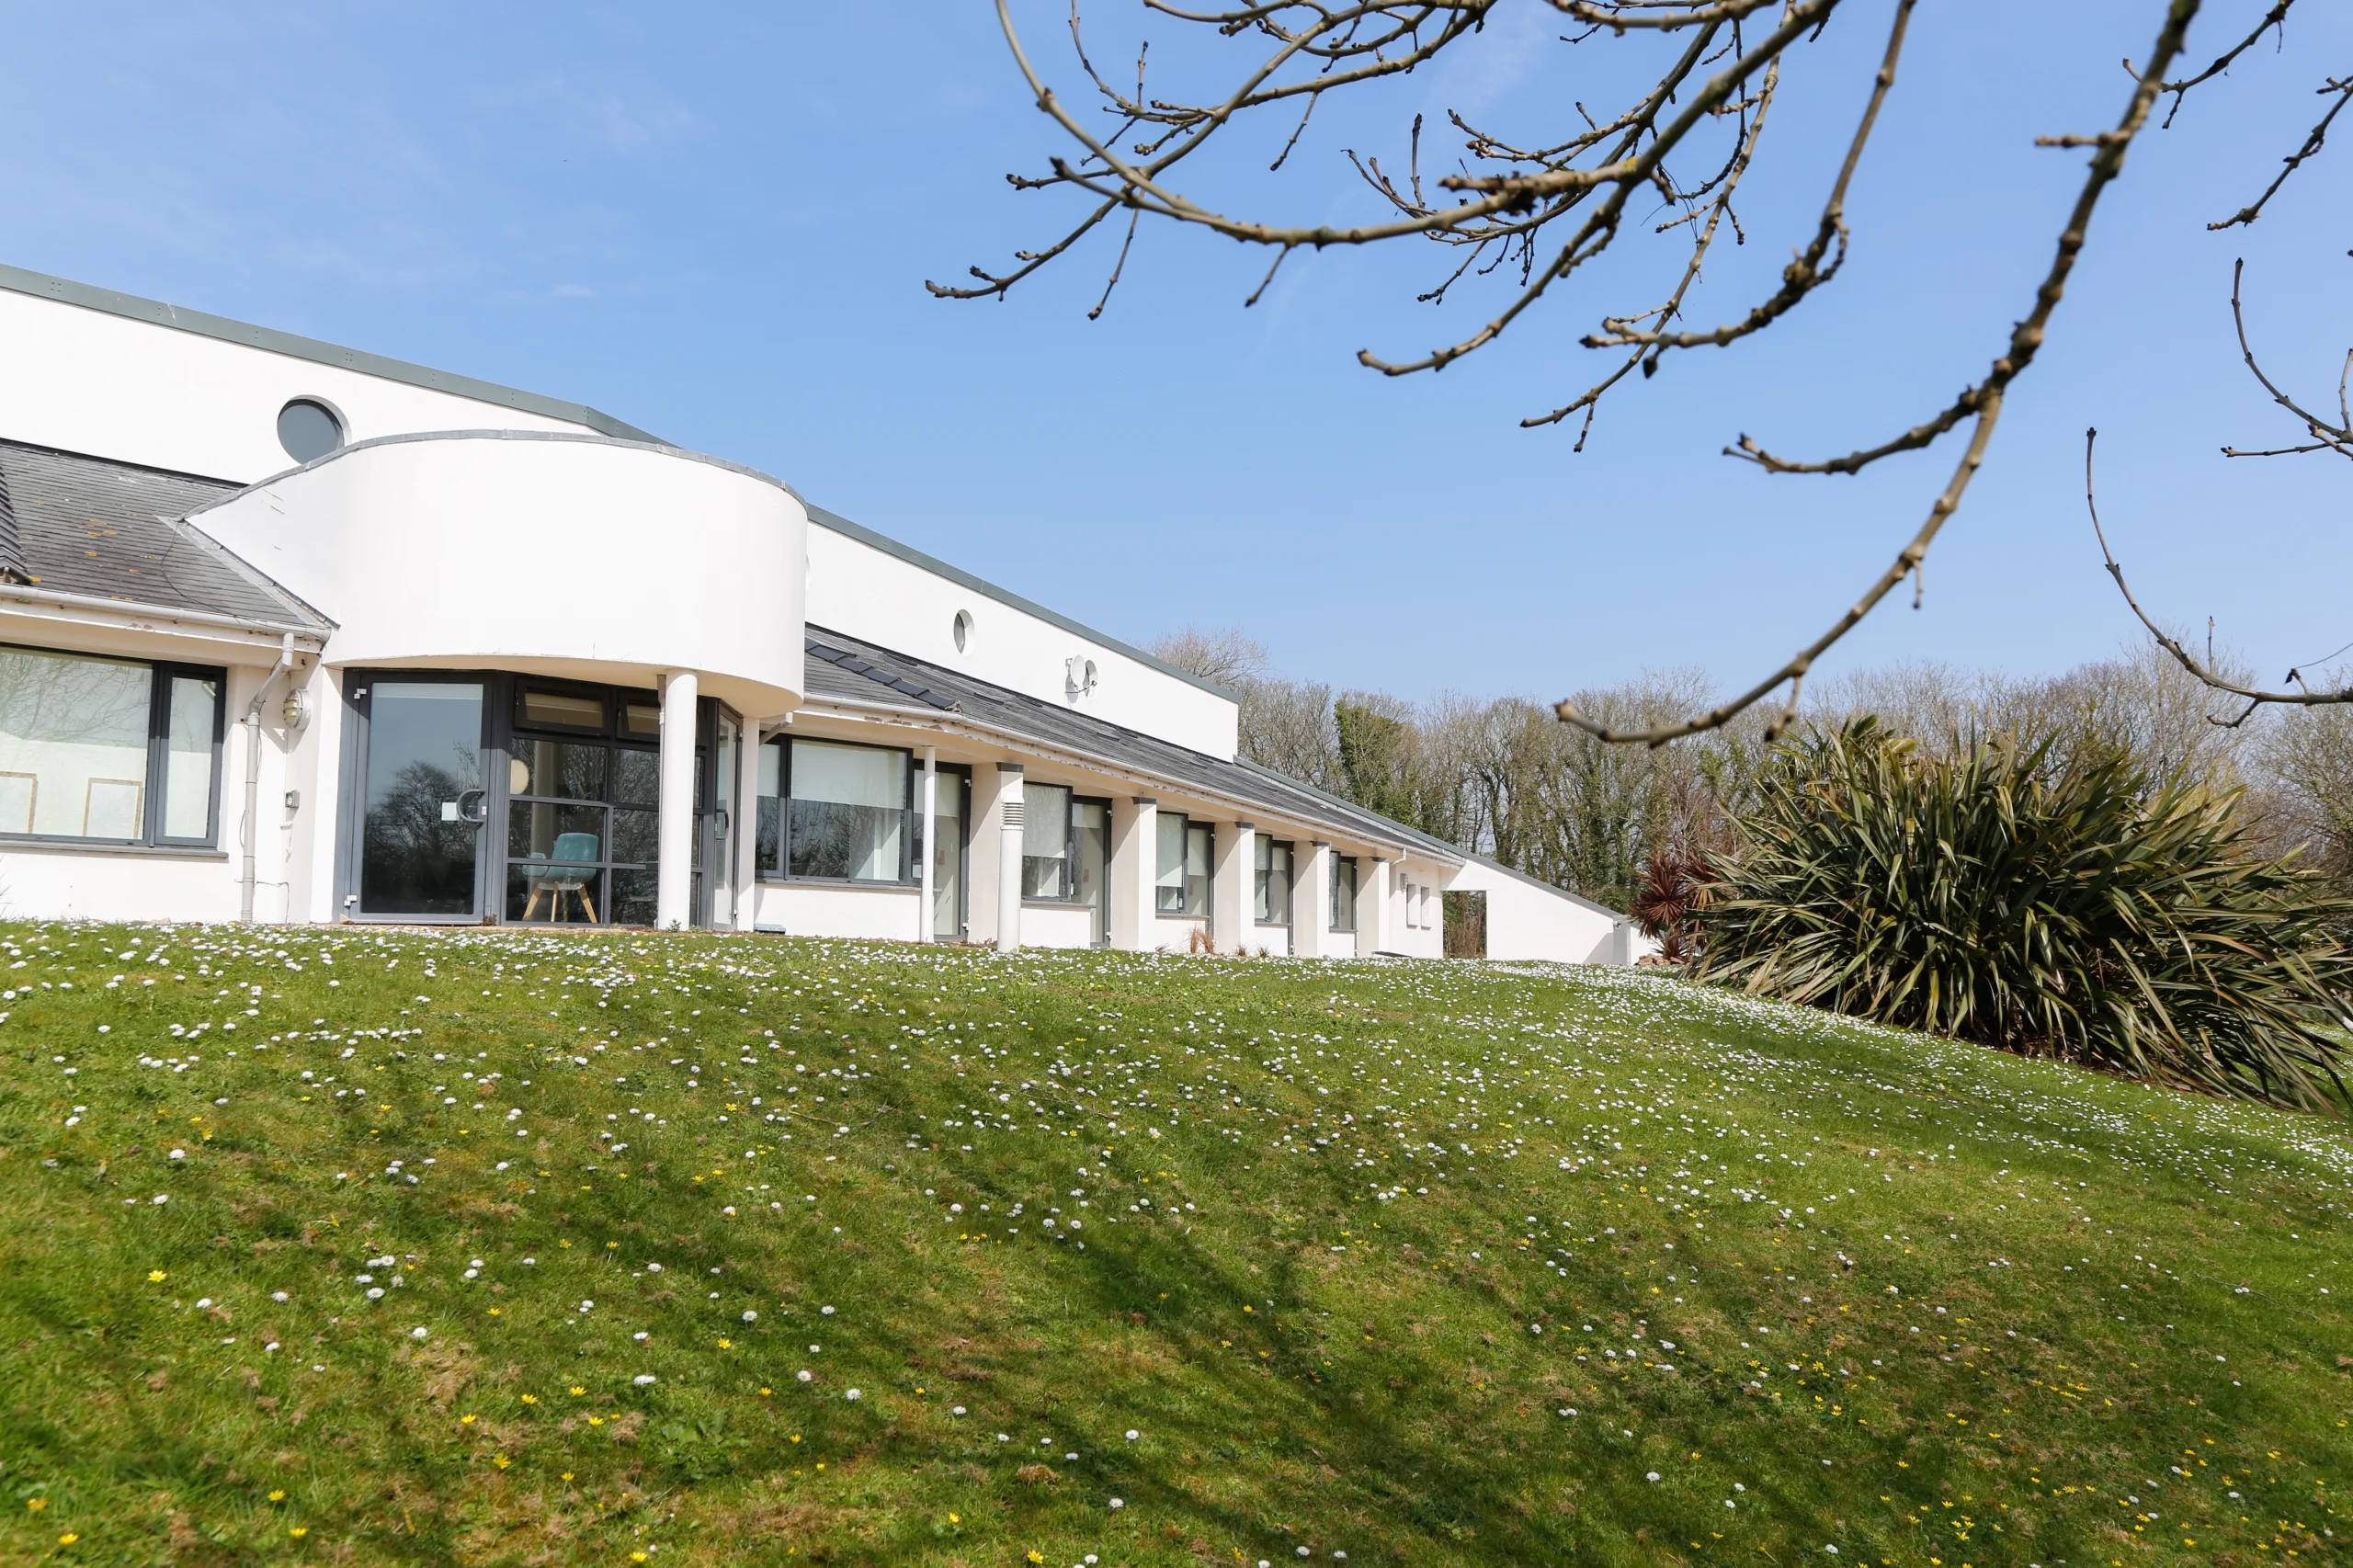 Ty Hafan, on the South Glamorgan coast, occupies a peaceful and tranquil location.